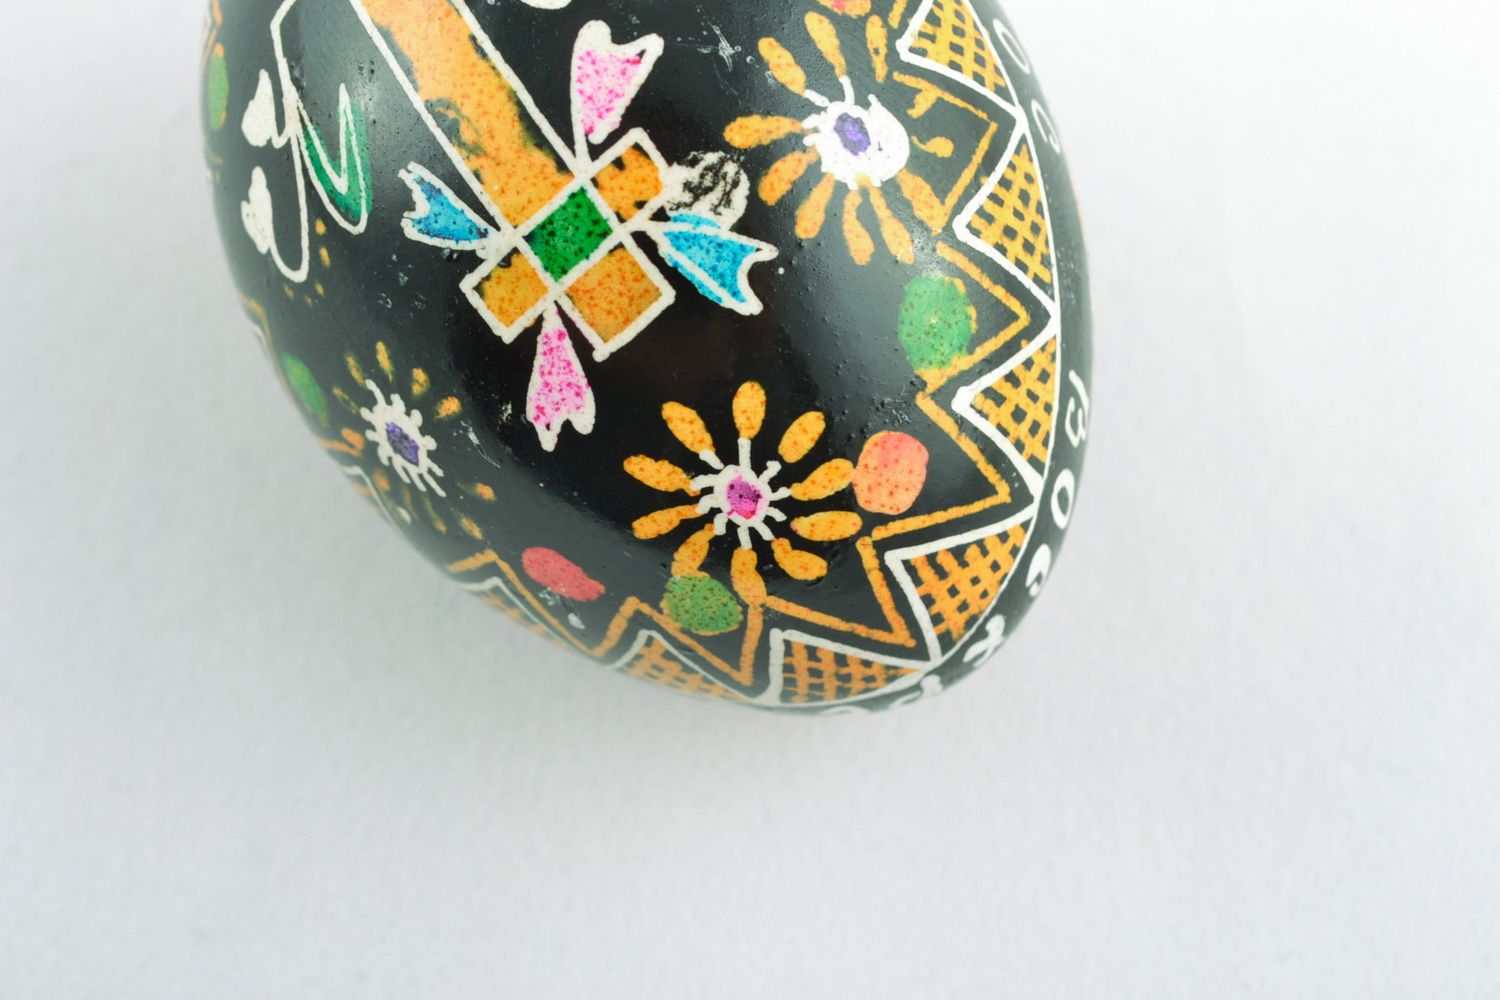 Homemade Easter egg painted with hot wax photo 5